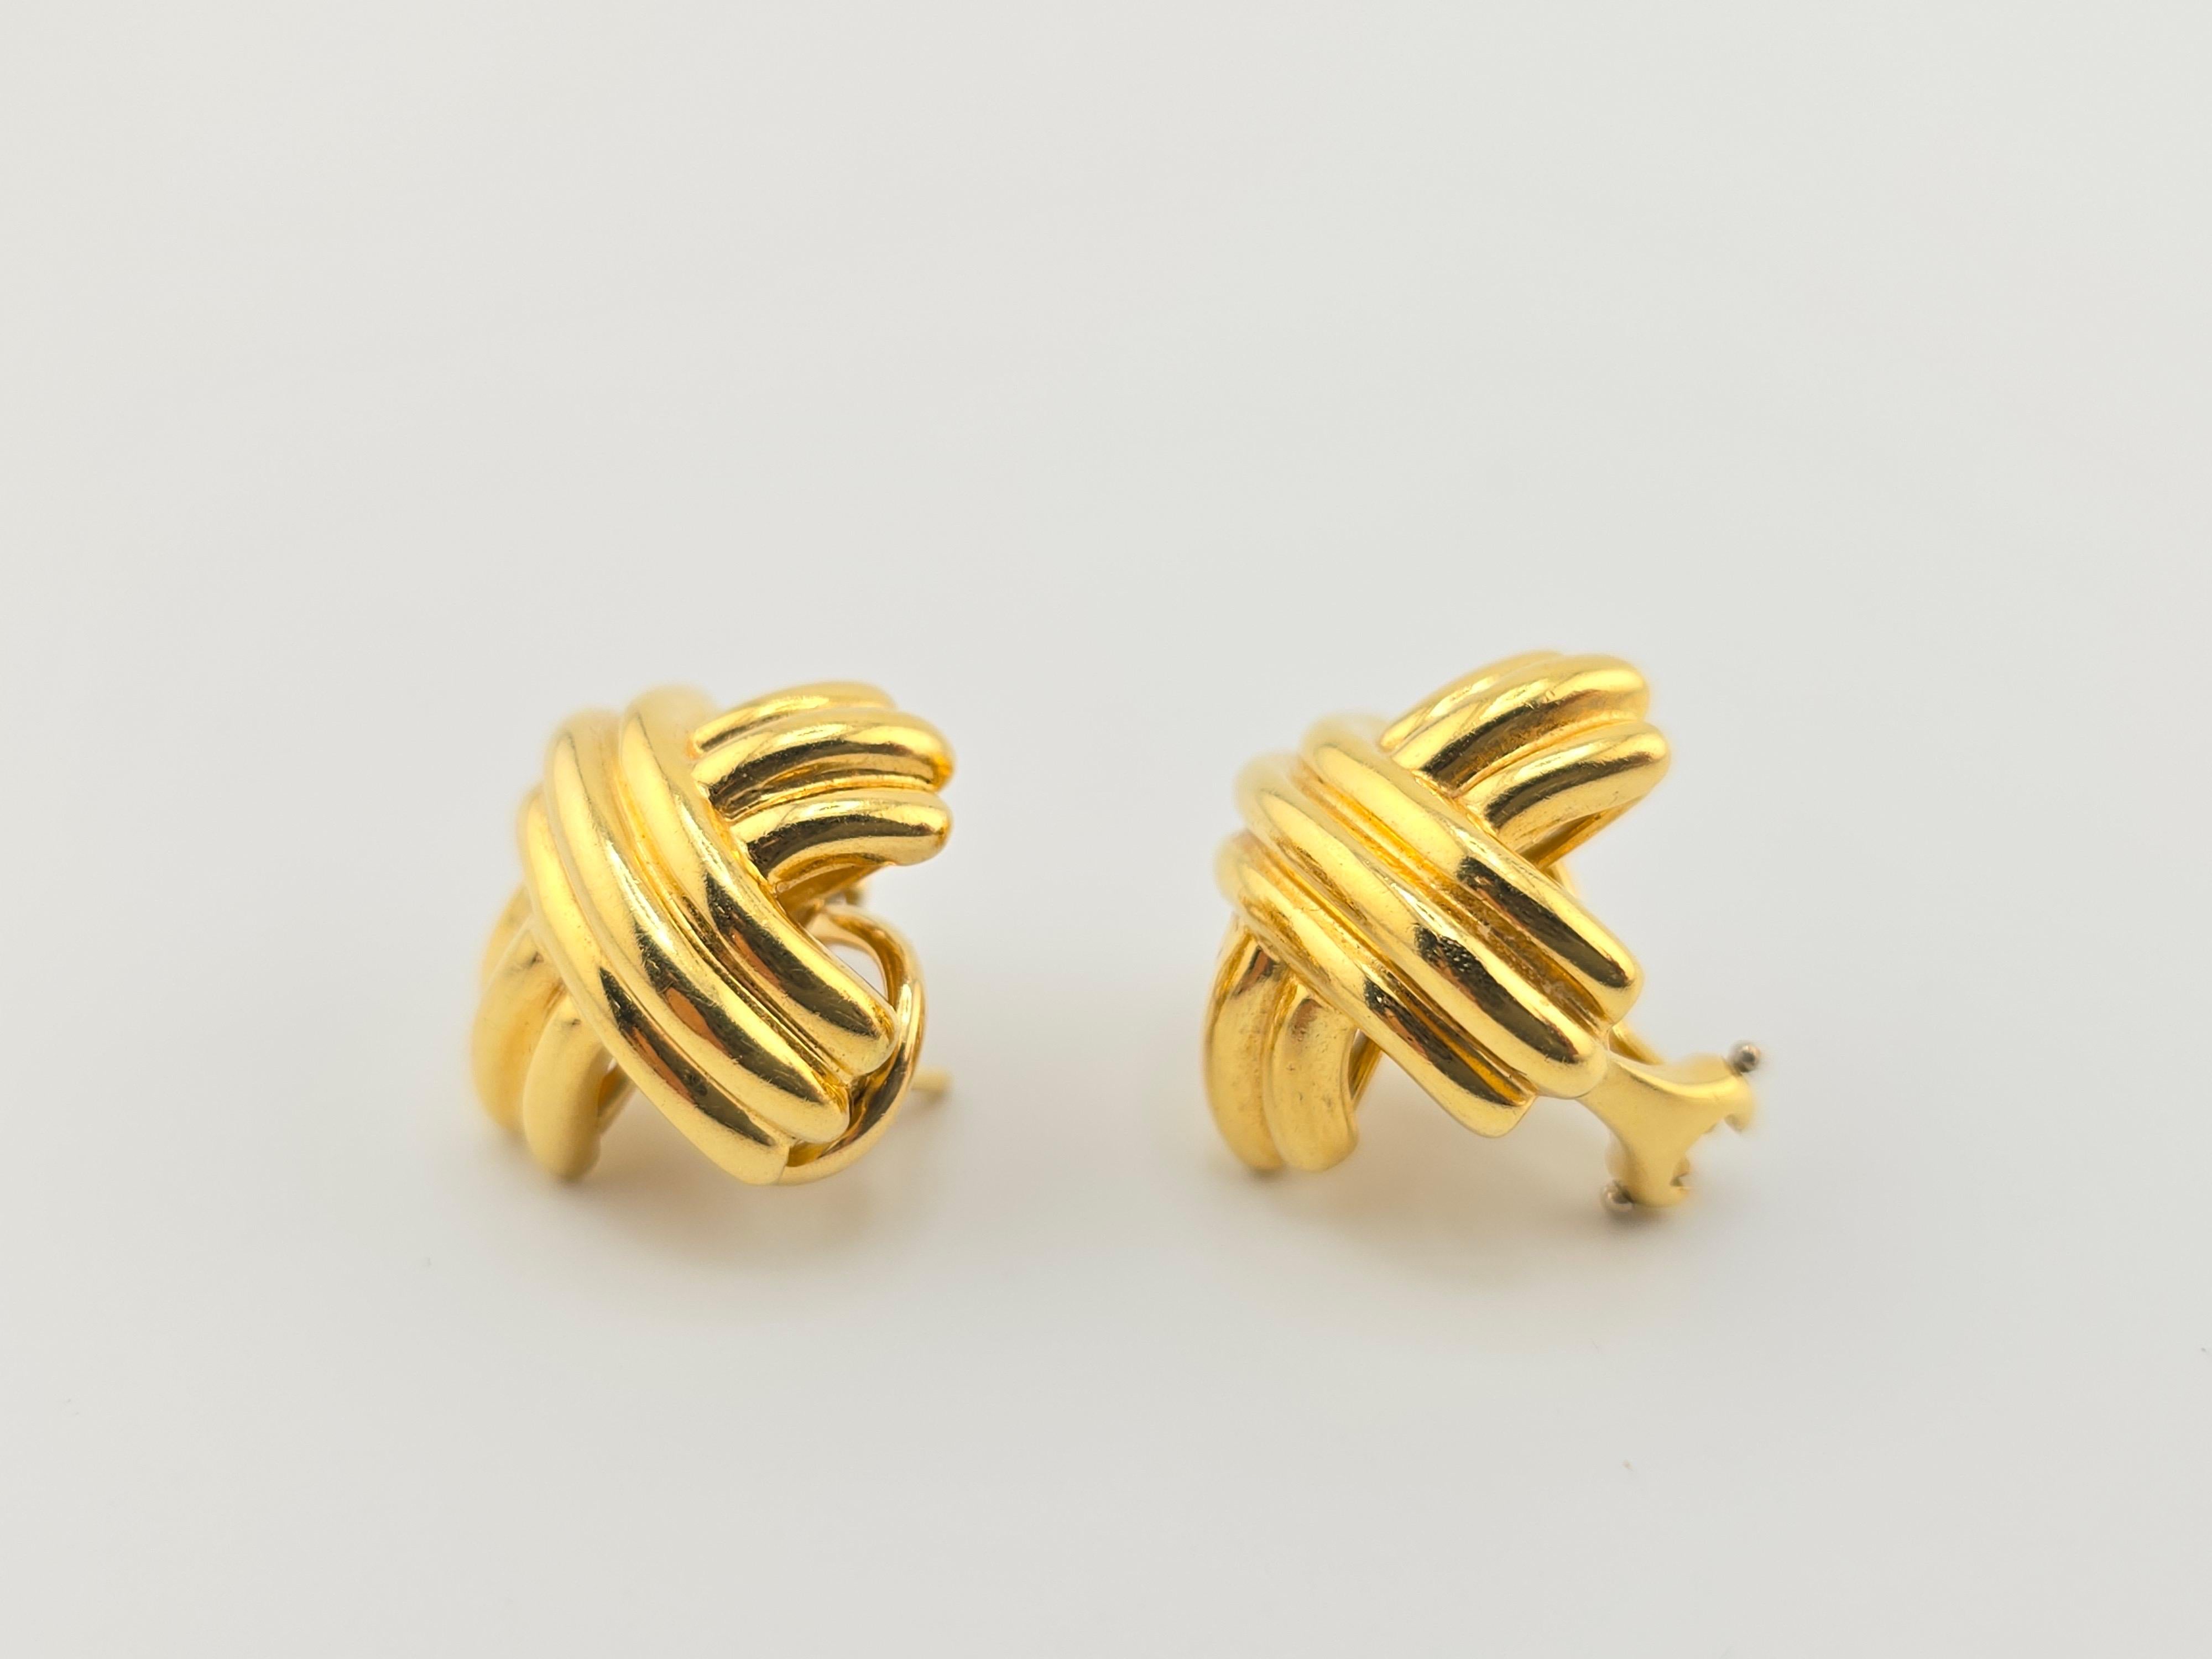 This is a gorgeous pair of Tiffany & Co. 18 Karat Yellow Gold X earrings. The condition on the earrings is great and it is ready to go. Each one is hallmarked by Tiffany & Co 18 karat. The size of each earring is 19 mm x 18 mm x 14 mm. The weight